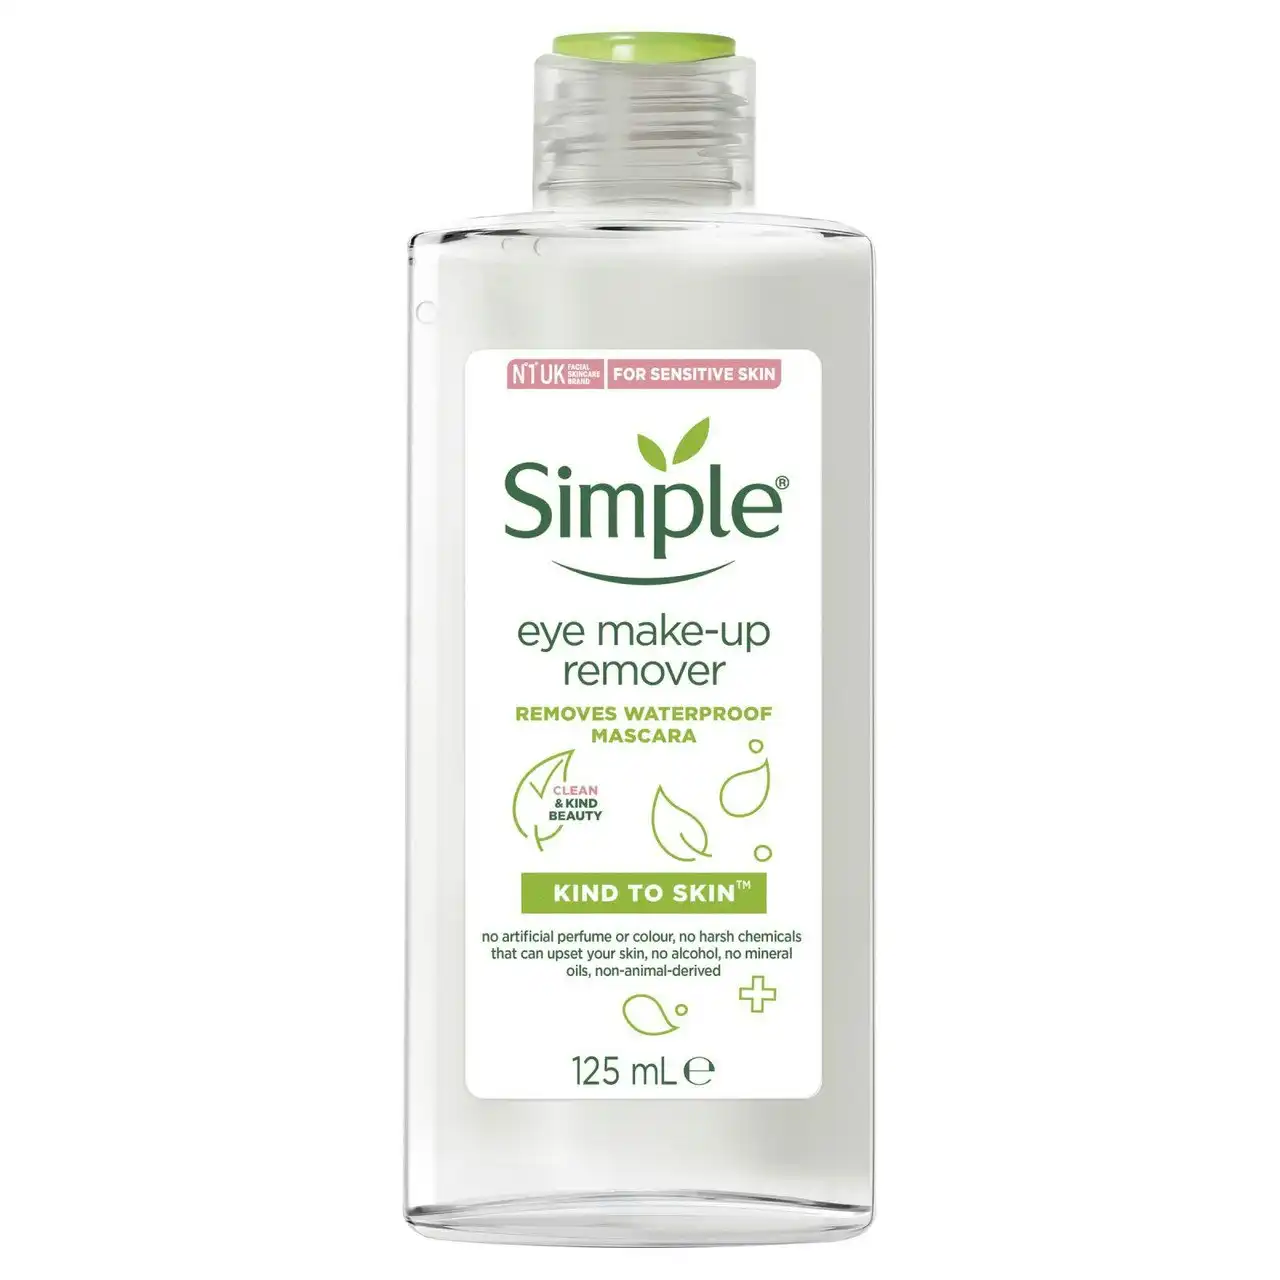 Simple  Eye Make-Up Remover  with Pro Vitamin B5 and Vitamin E removes waterproof mascara 125ml